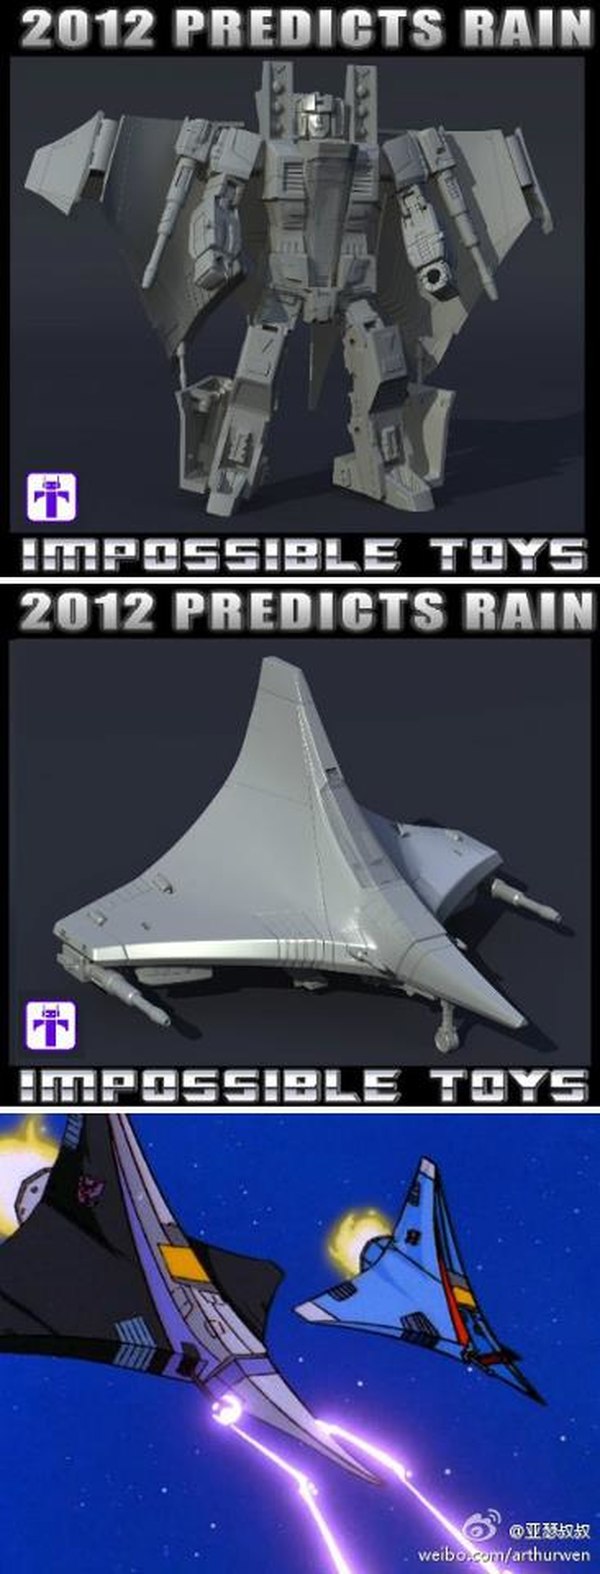 Impossible Toys Reveal Cybertron Seekers Project - Transformers Return To The Hood